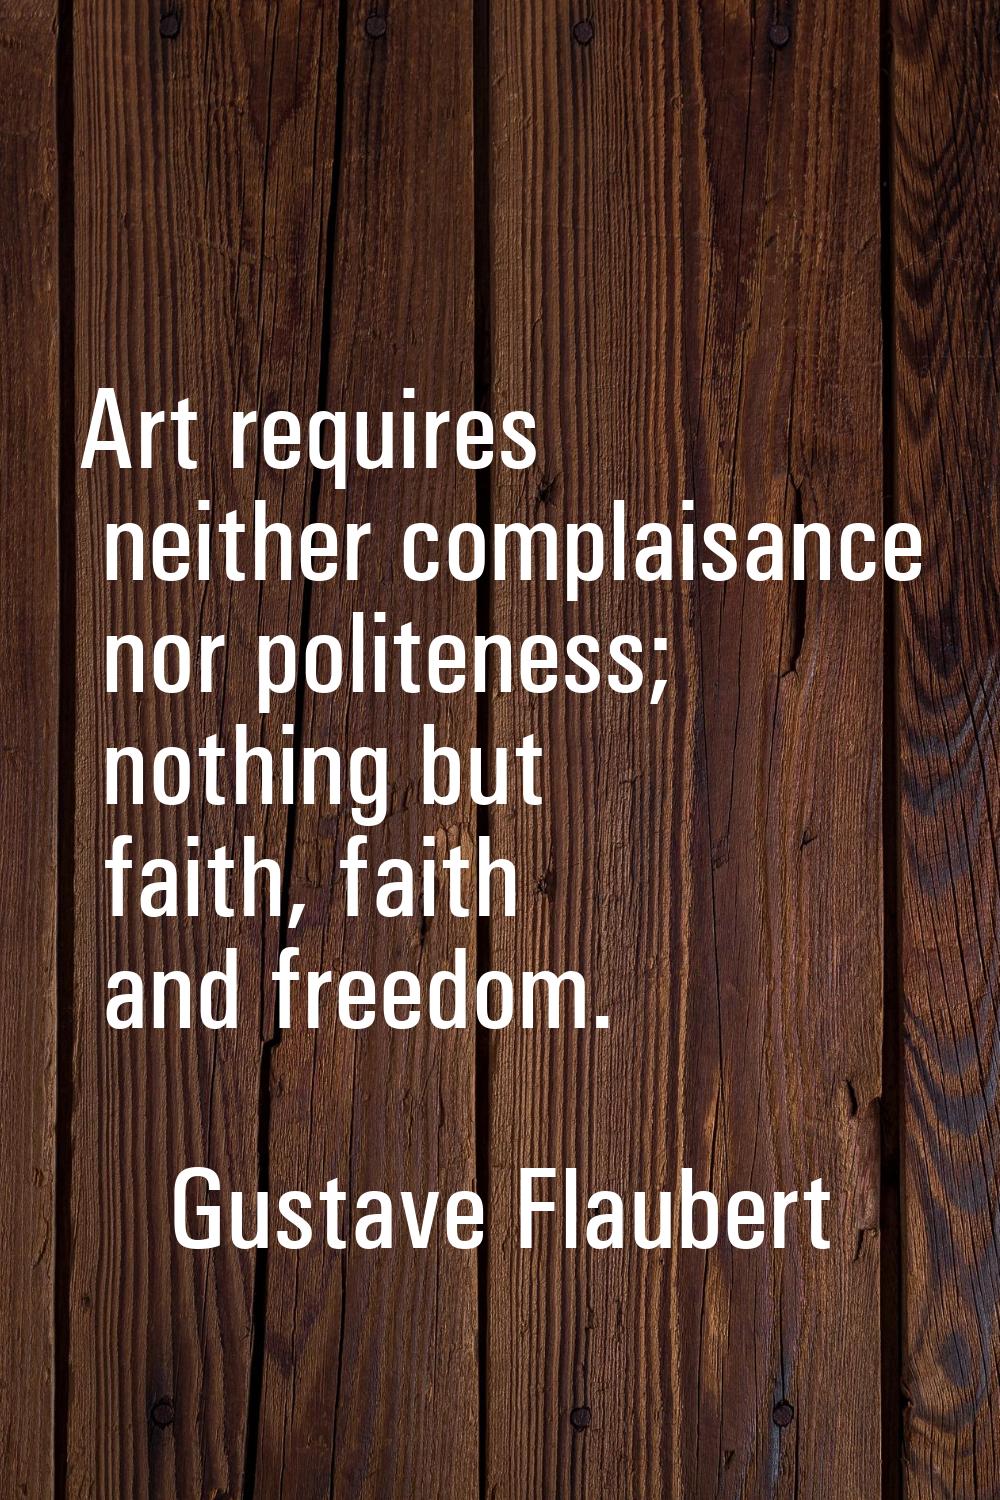 Art requires neither complaisance nor politeness; nothing but faith, faith and freedom.